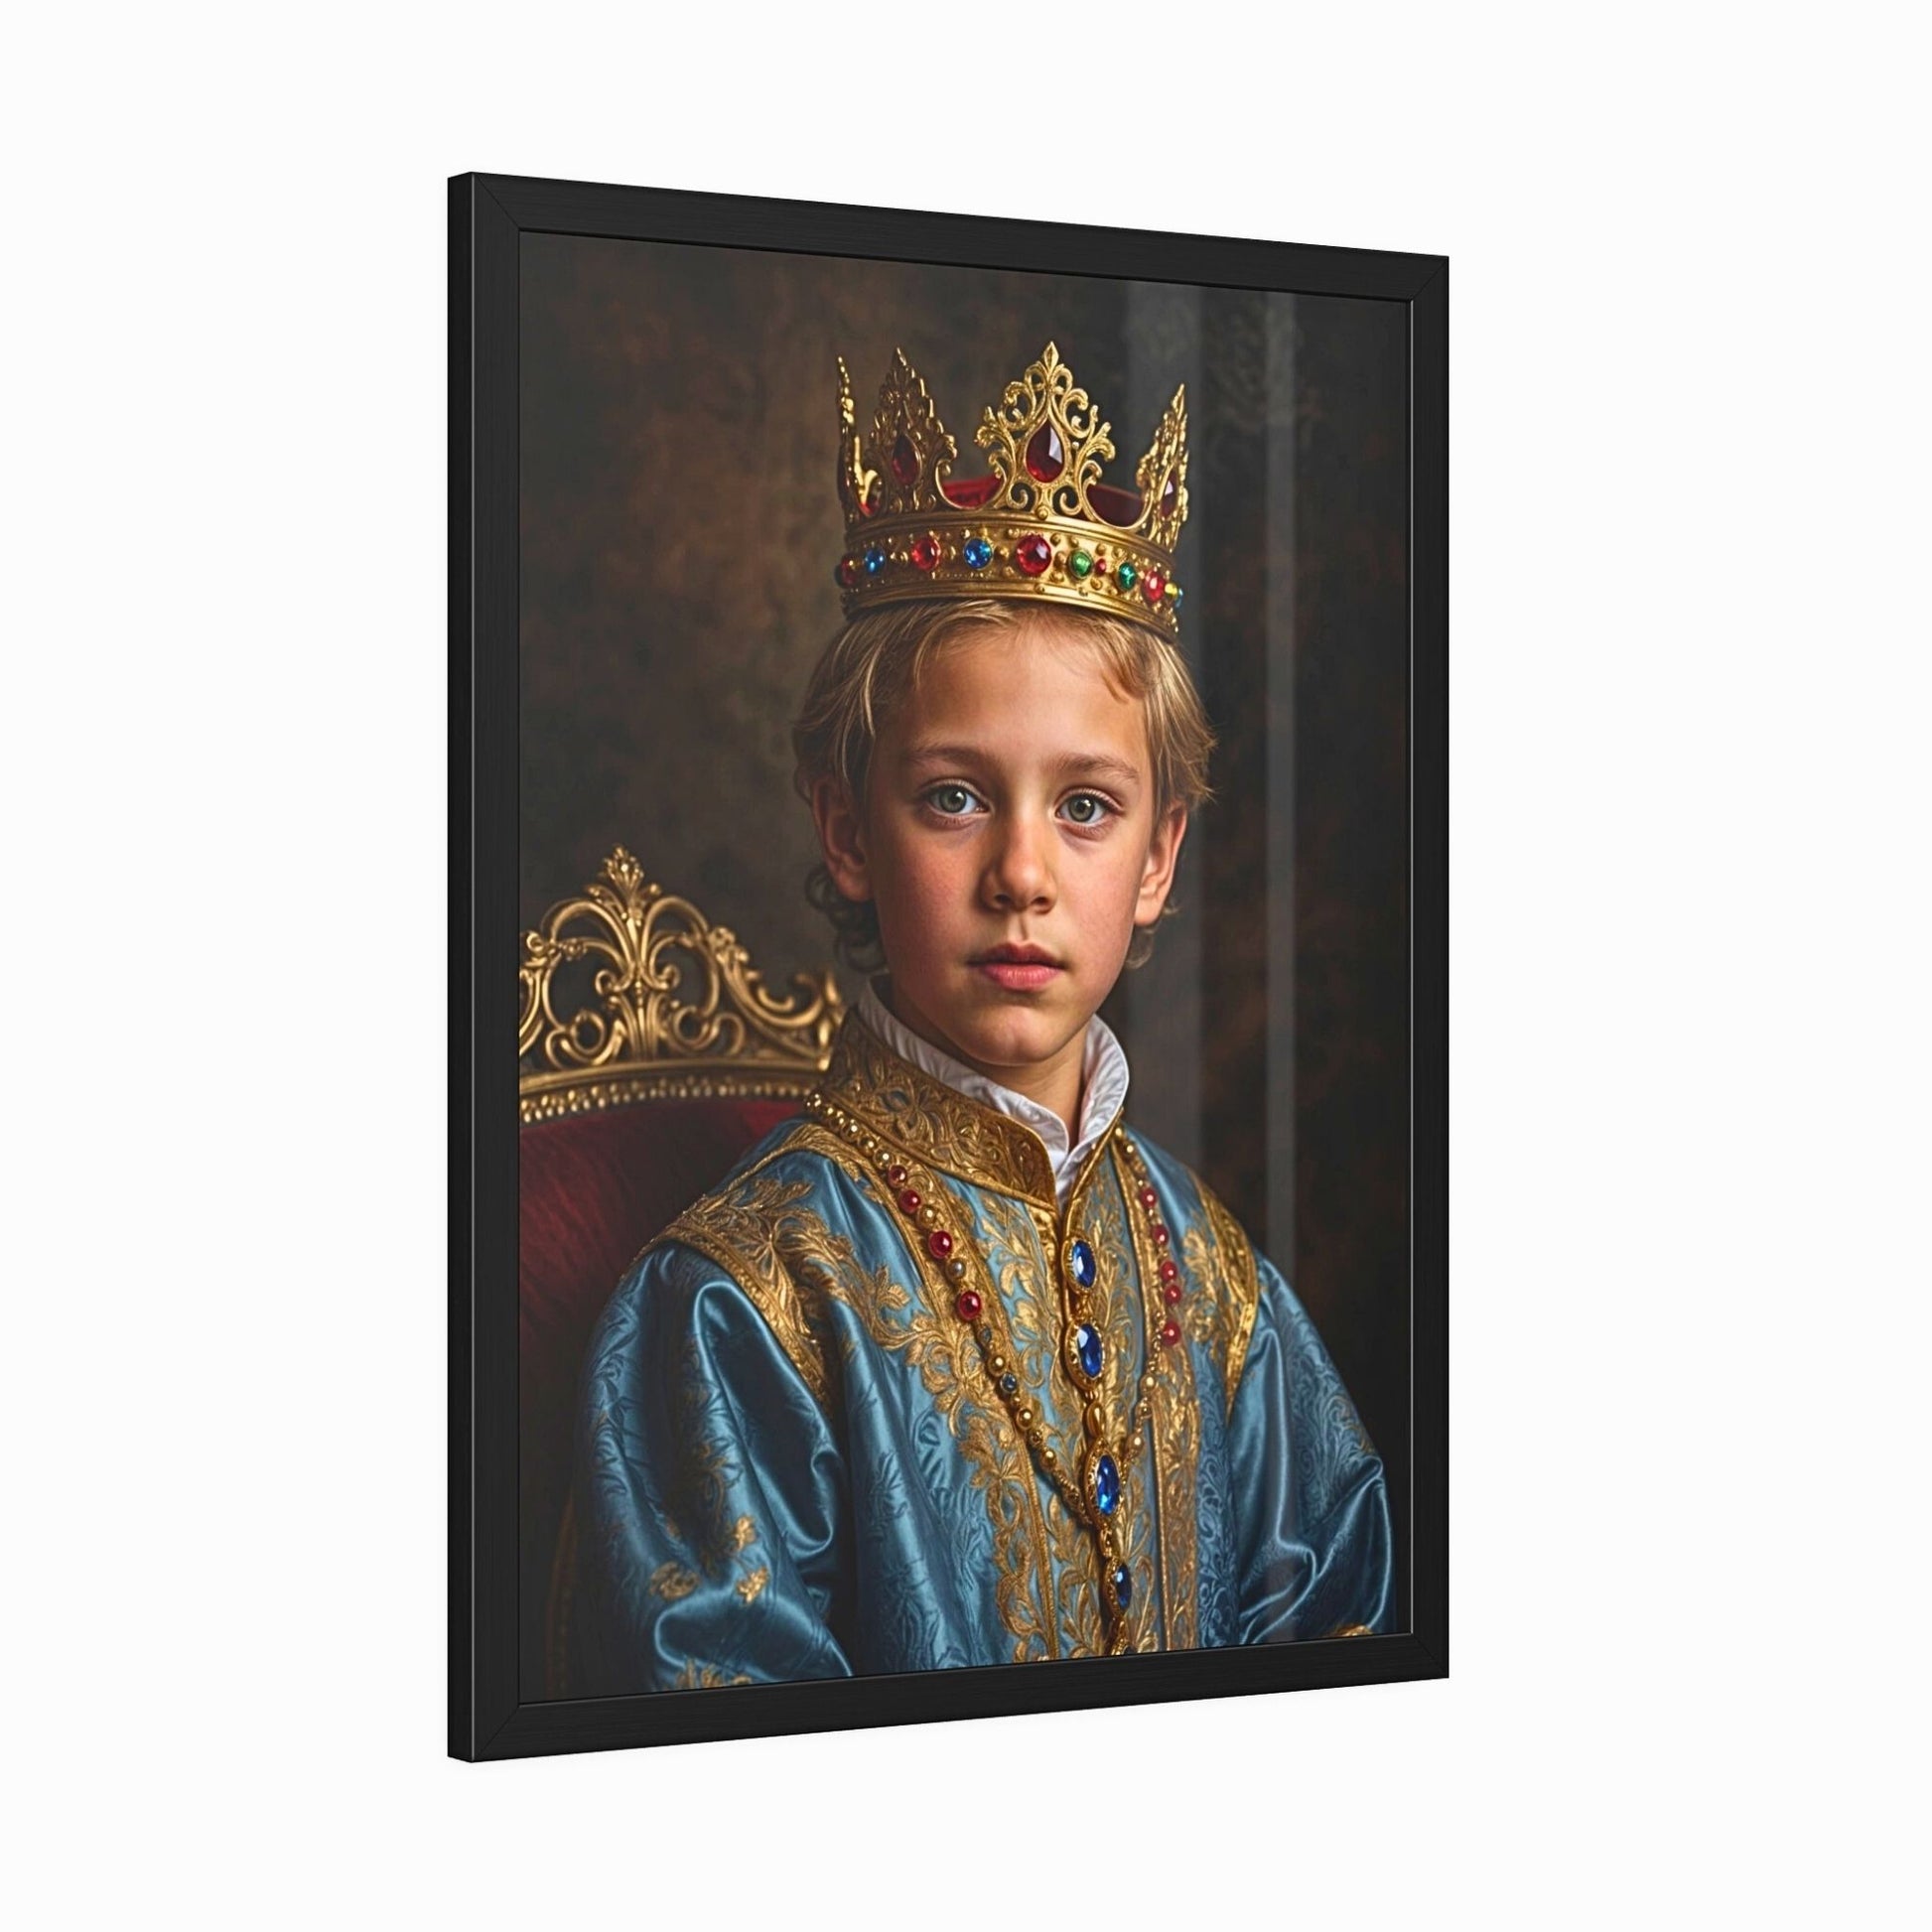 Transform your child's photo into a majestic royal portrait! Our custom portraits are perfect for birthdays, featuring personalized artwork of your little King or Queen. Capture the essence of royalty with unique Renaissance-inspired designs that make cherished gifts for any occasion.